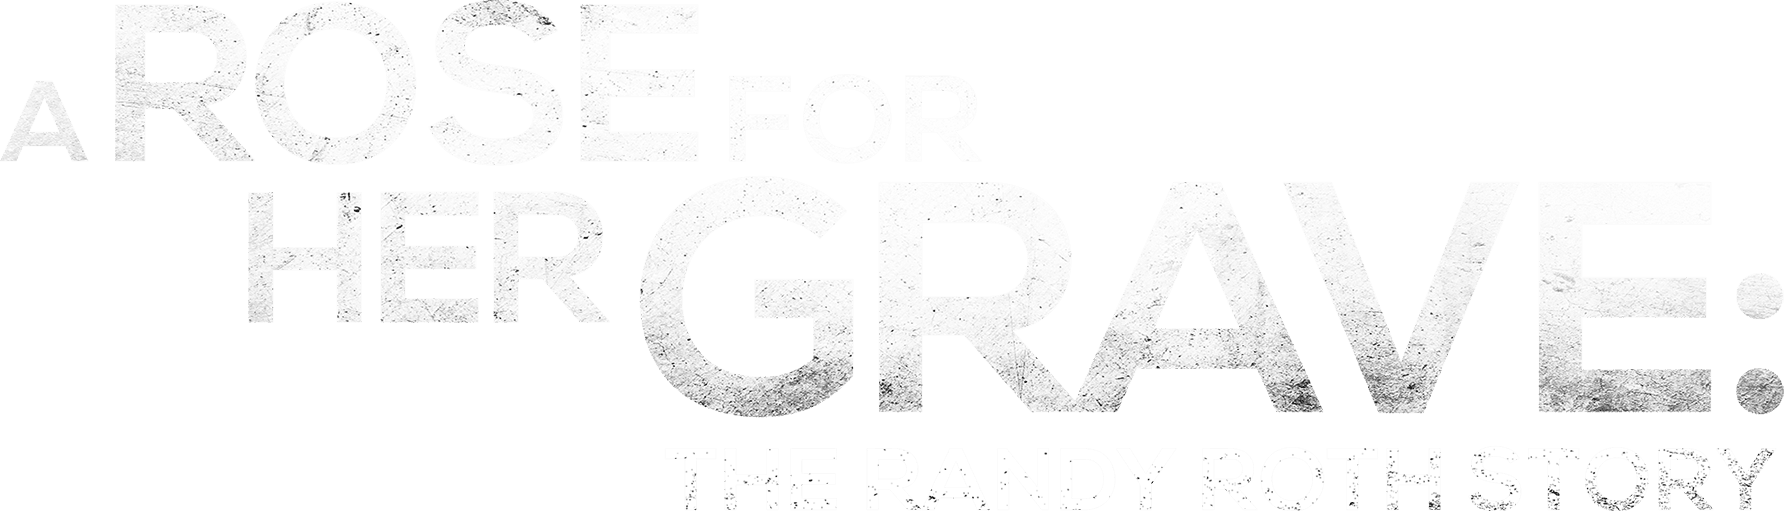 A Rose for Her Grave: The Randy Roth Story logo